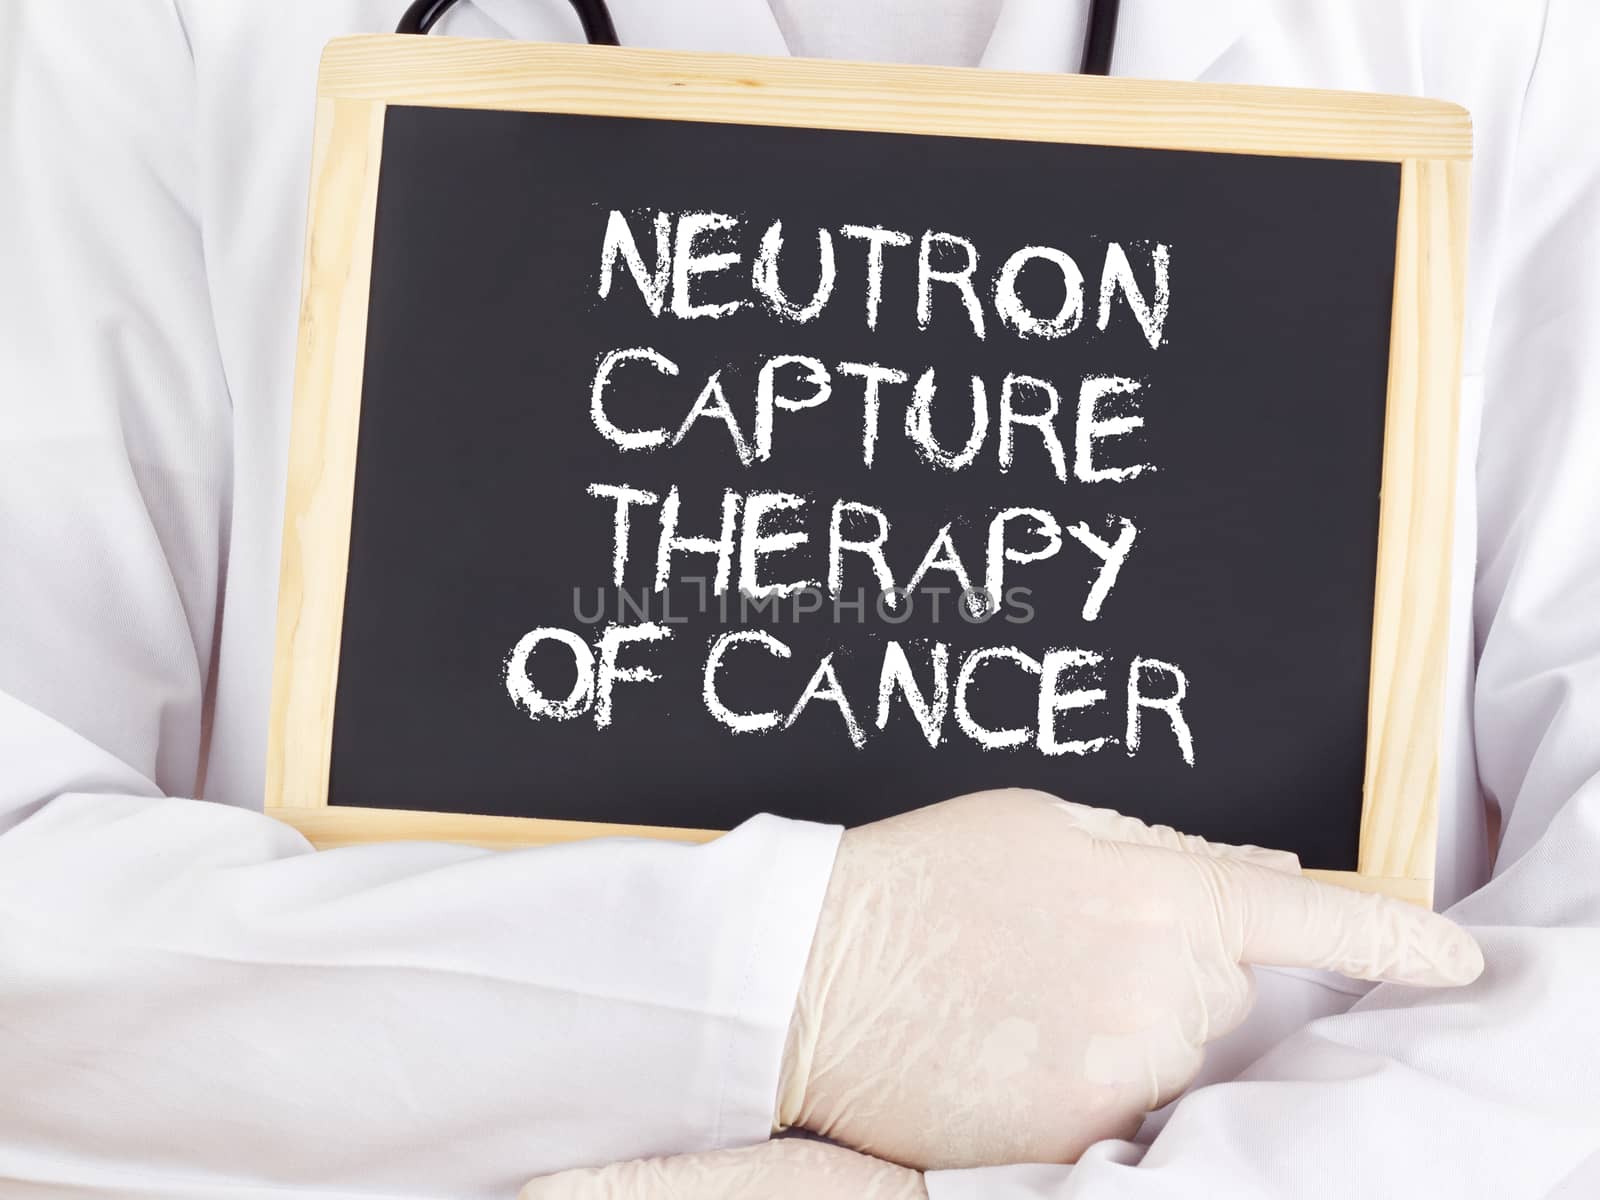 Doctor shows information: neutron capture therapy of cancer by gwolters